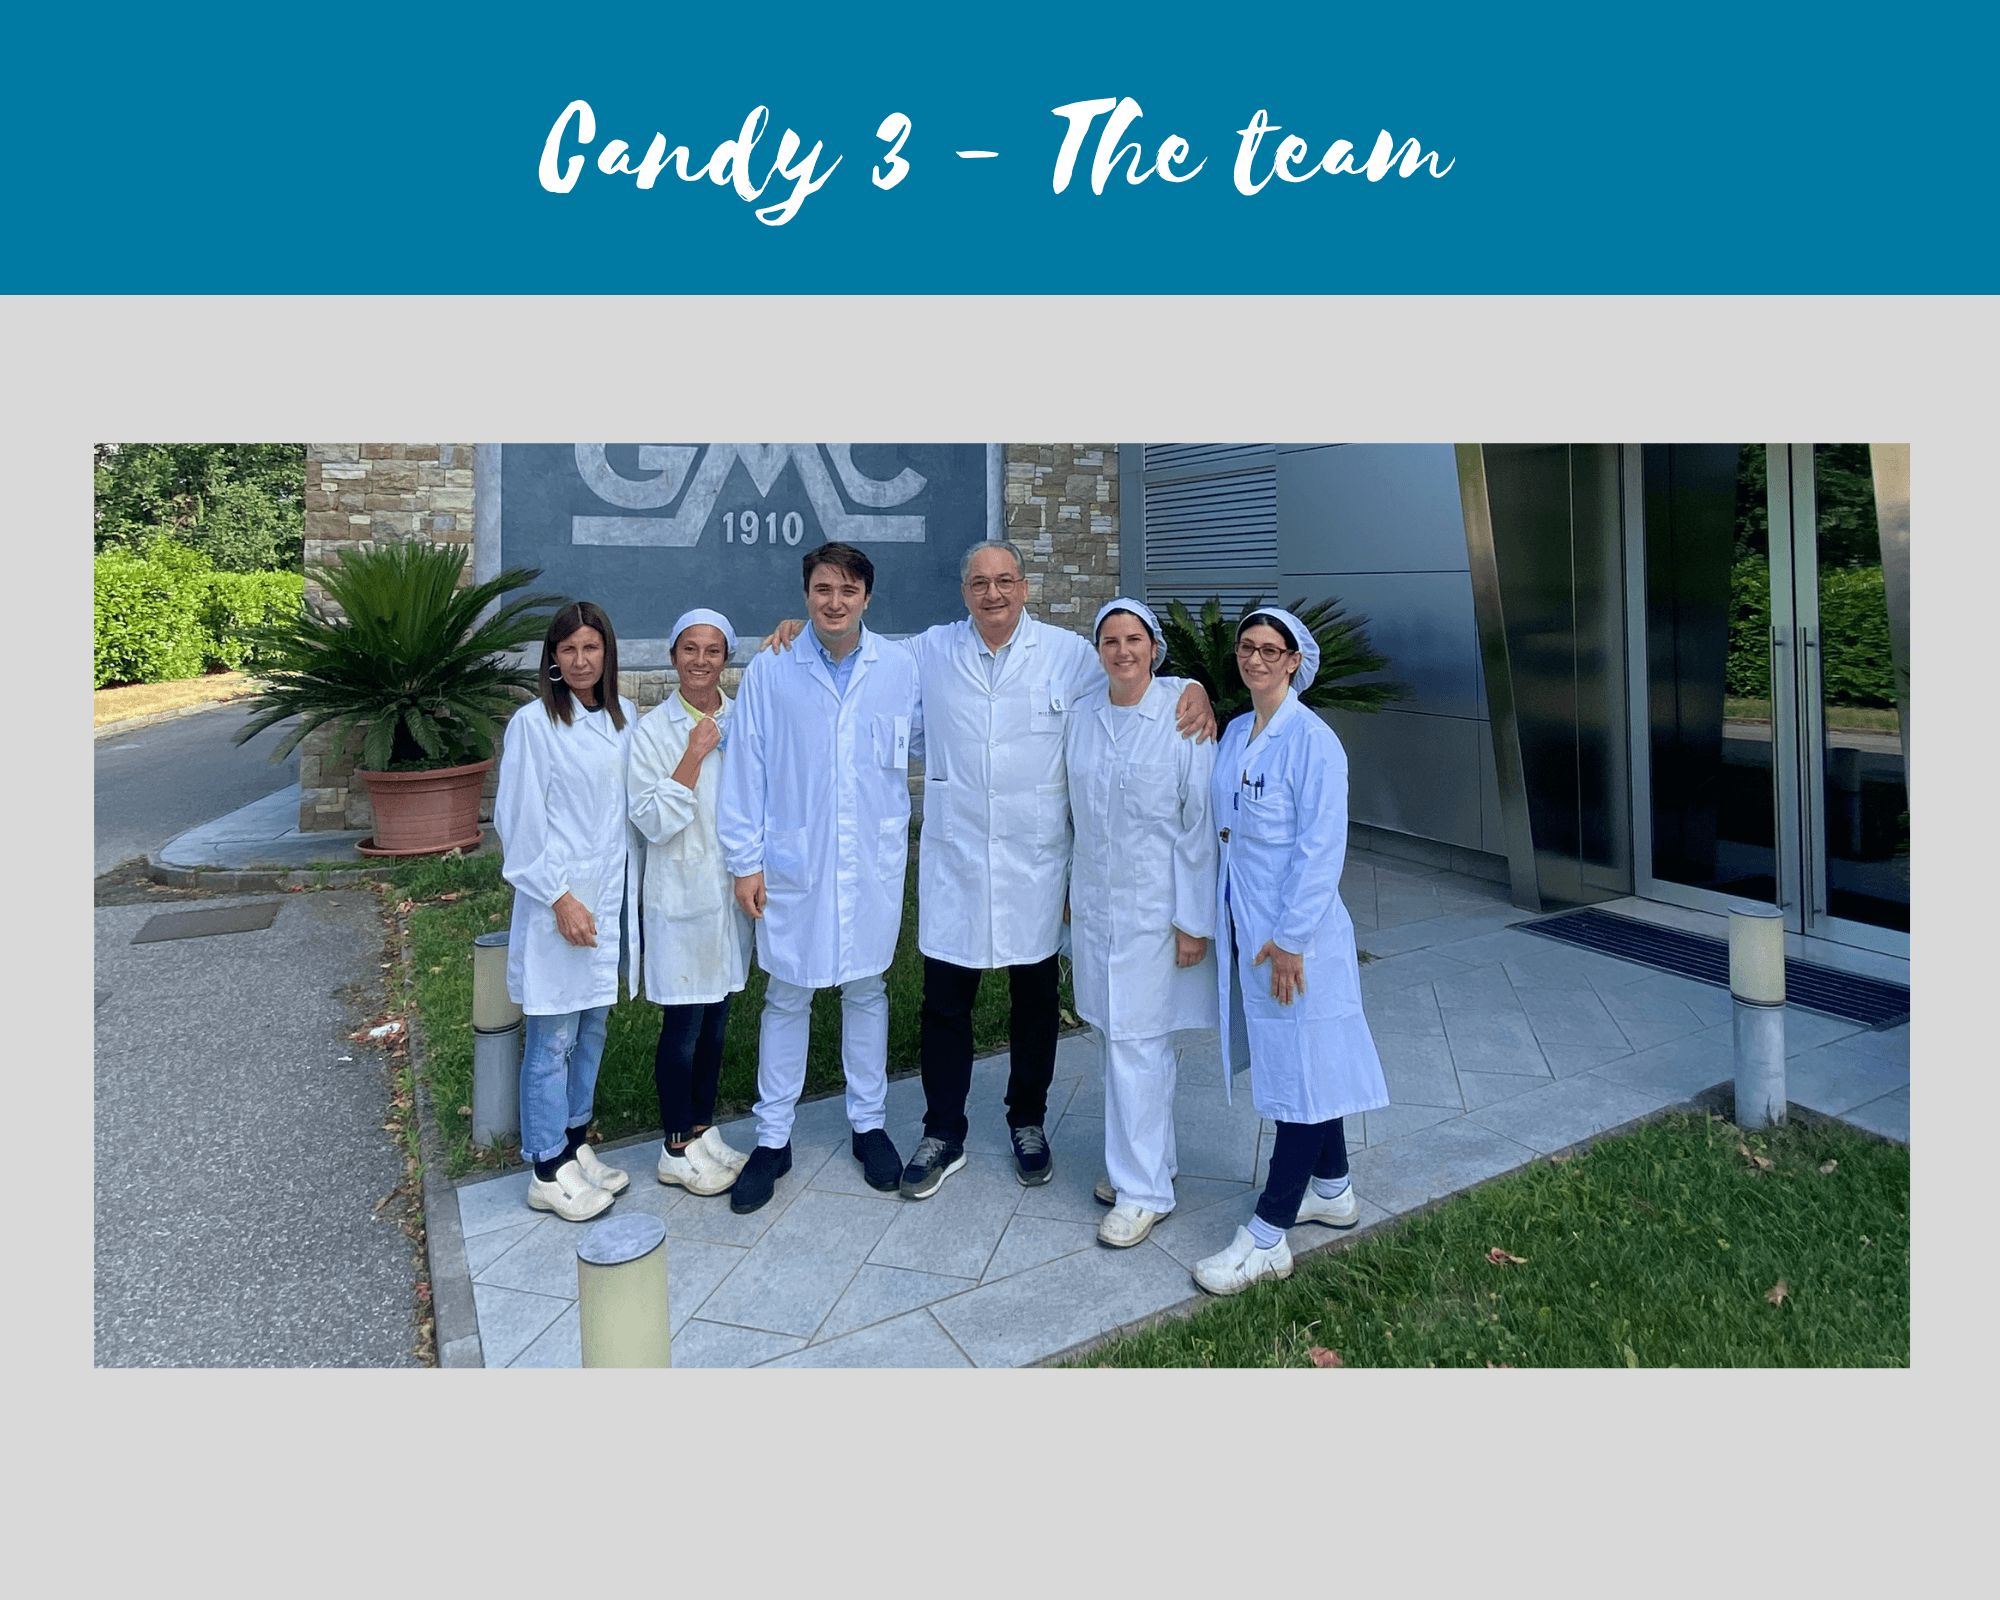 Candy 3 - The team